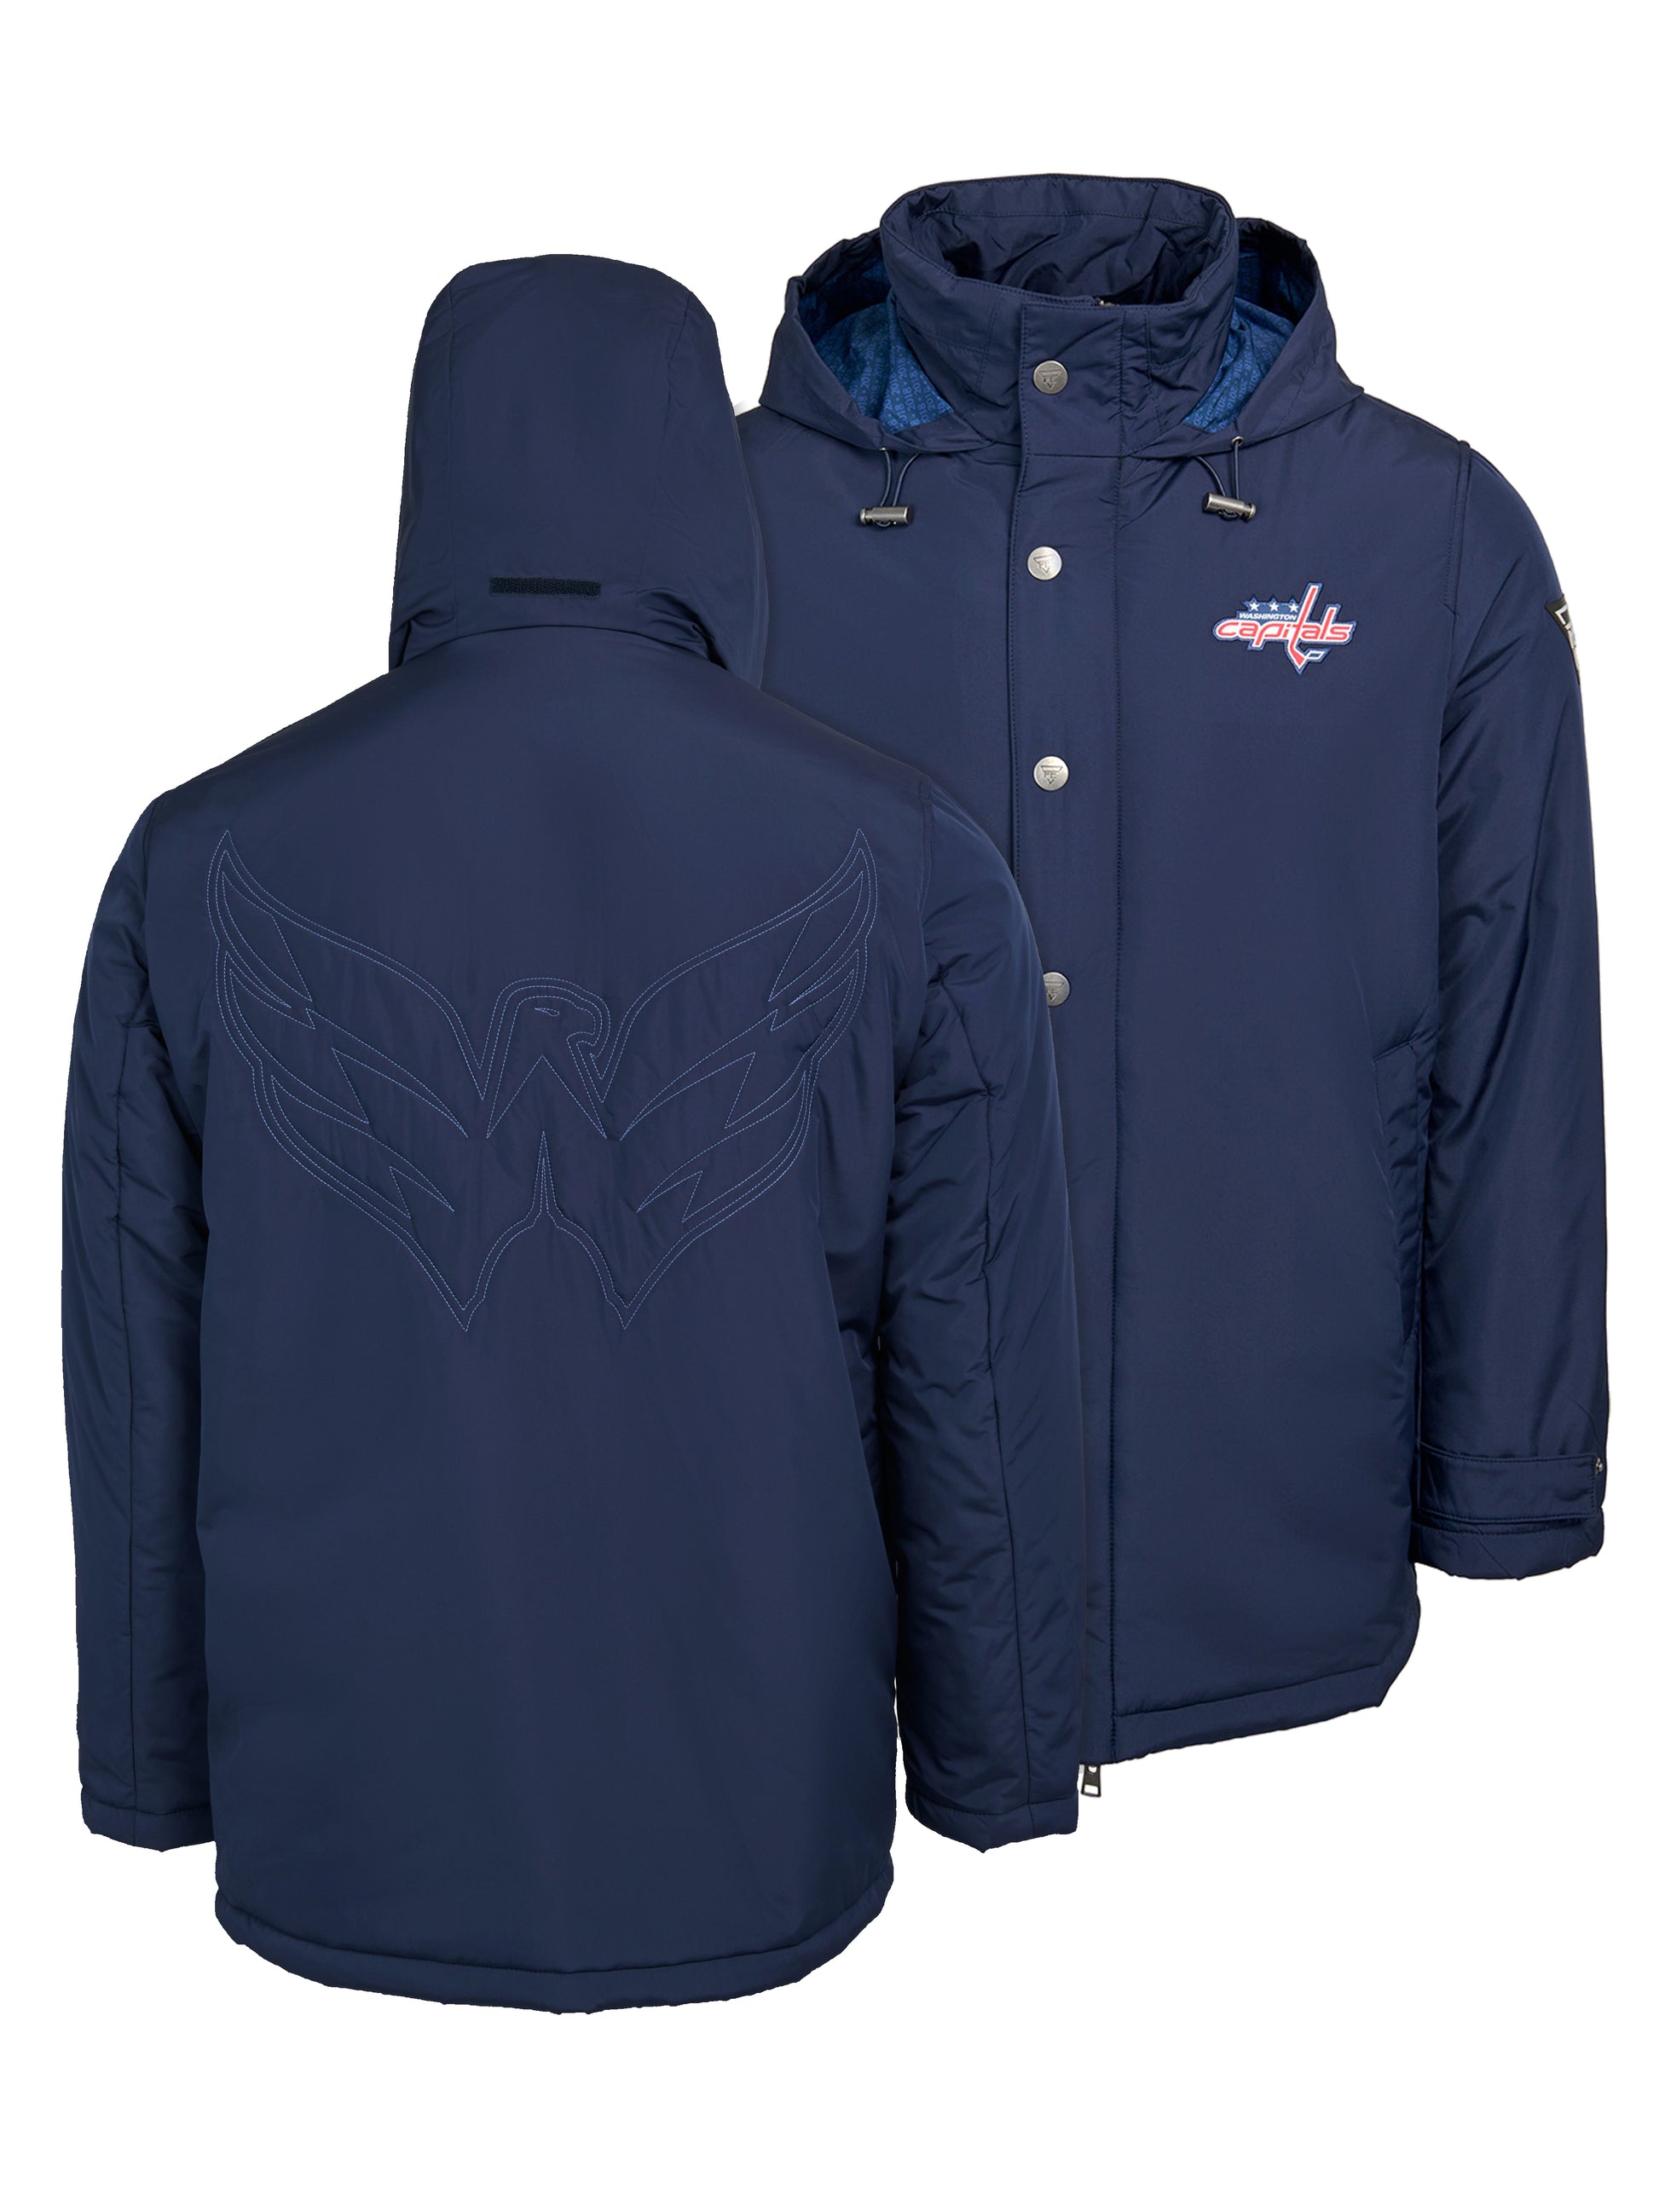 Washington Capitals Coach's Jacket - The jacket features a quilted stitch of the Washington Capitals logo centered on the back and has a removal hood in the team colors, elevating this NHL hockey clothing collection